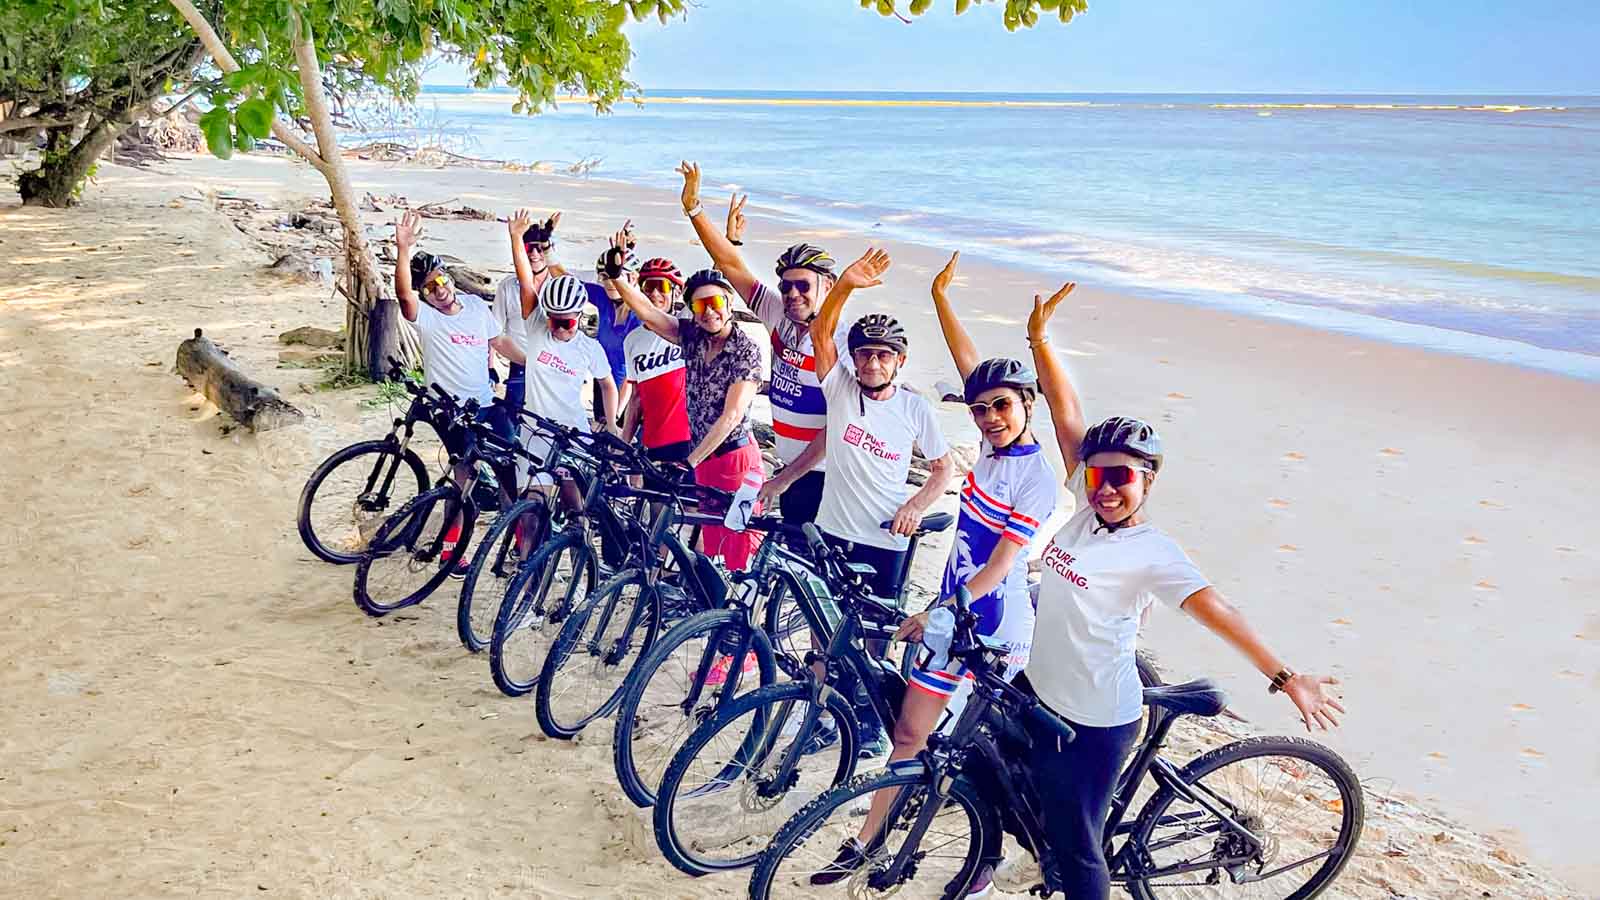 Tour group of cyclists waving to camera while on Thai beach